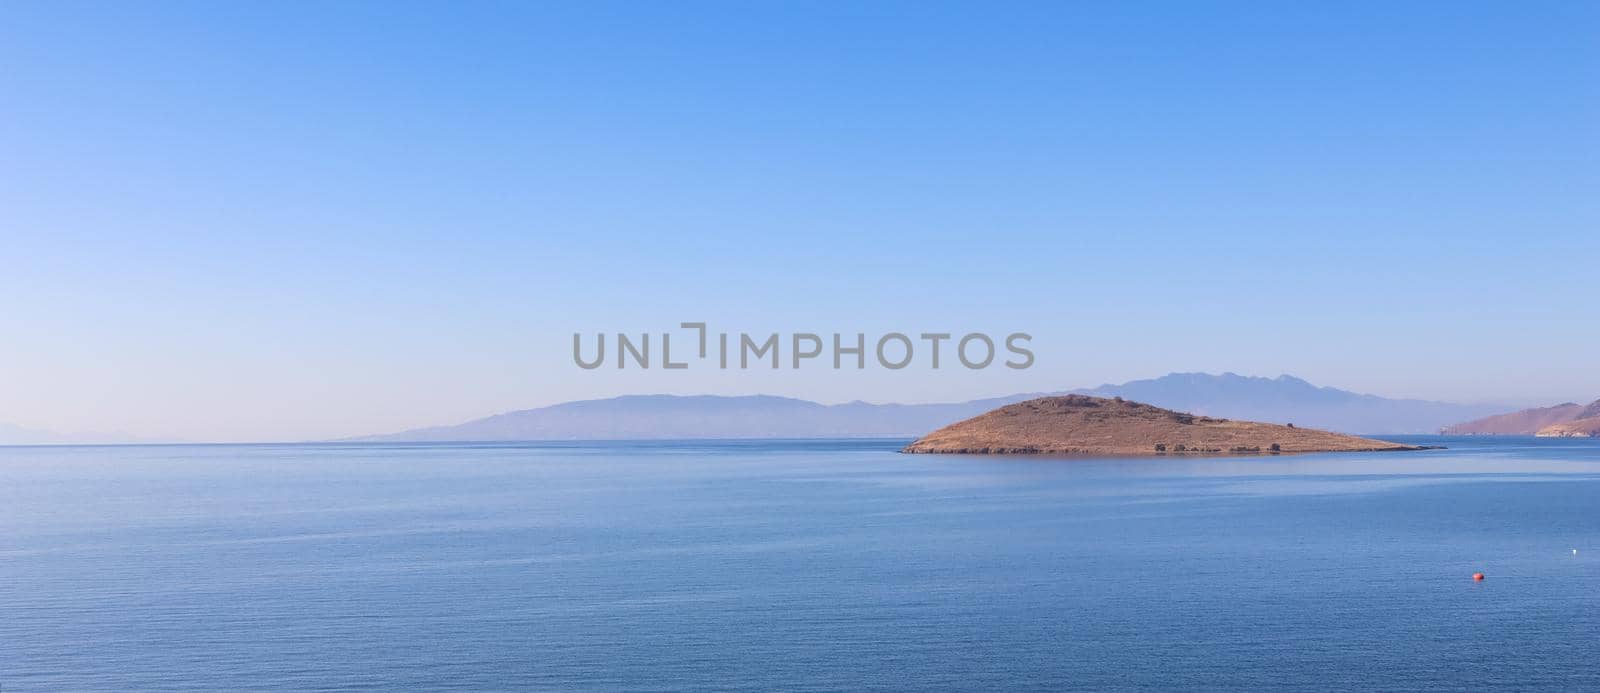 Aegean Sea with calm blue water and islands. Summer holiday concept and travel background